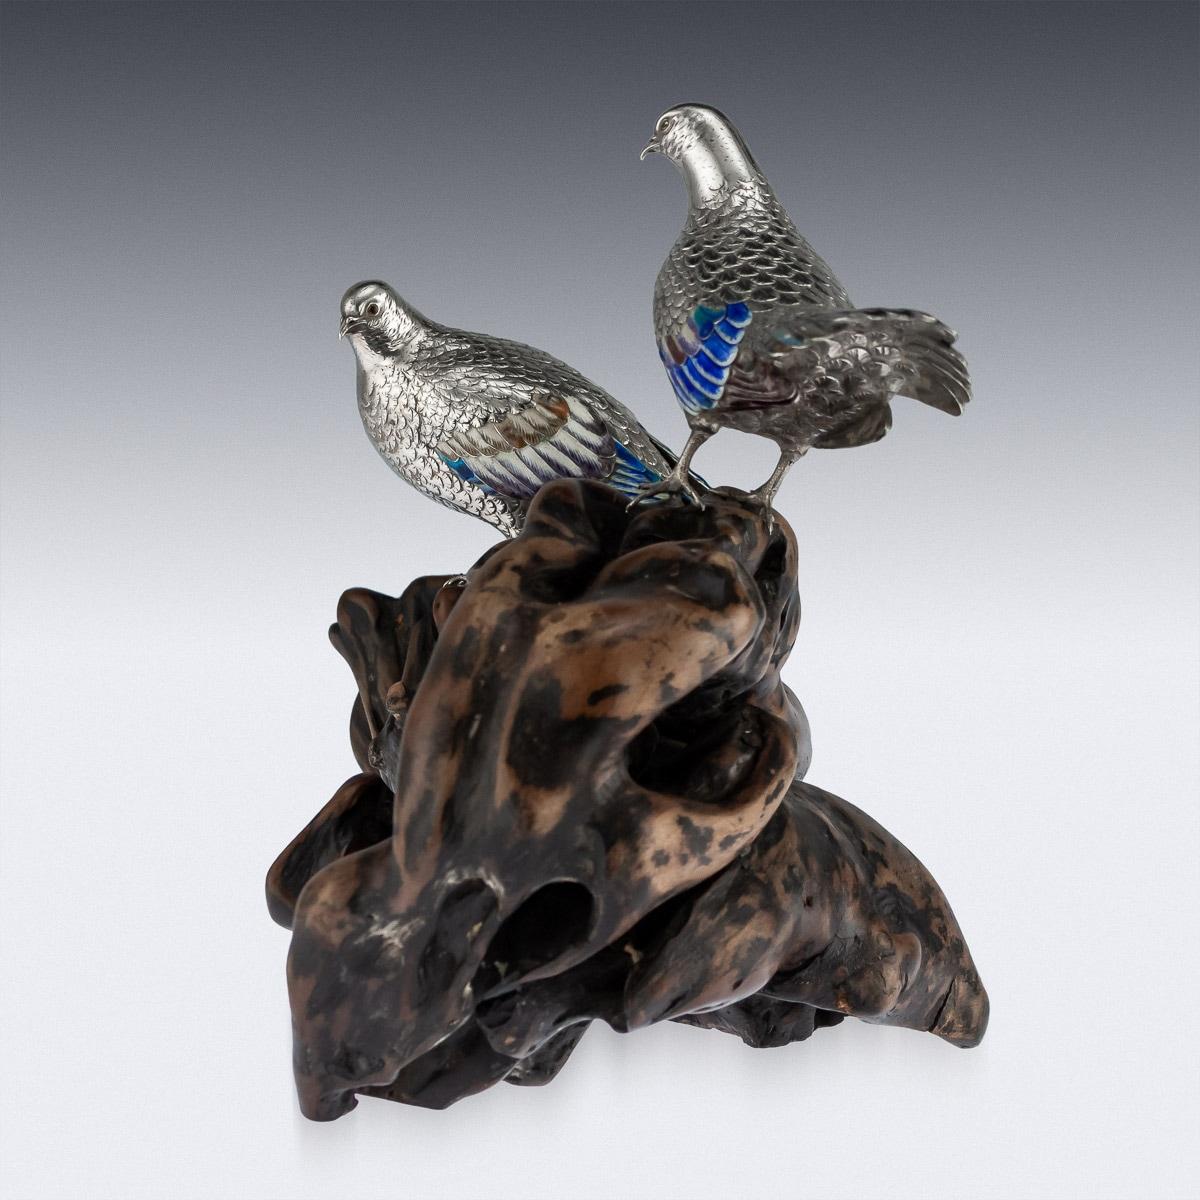 Antique late 19th century Japanese Meiji period very fine silver figures of wild wood pigeons, on a carved wood Stand. The naturalistically modeled birds decorated with enameled eyes and plumage, with realistically engraved feathers. Tested to be